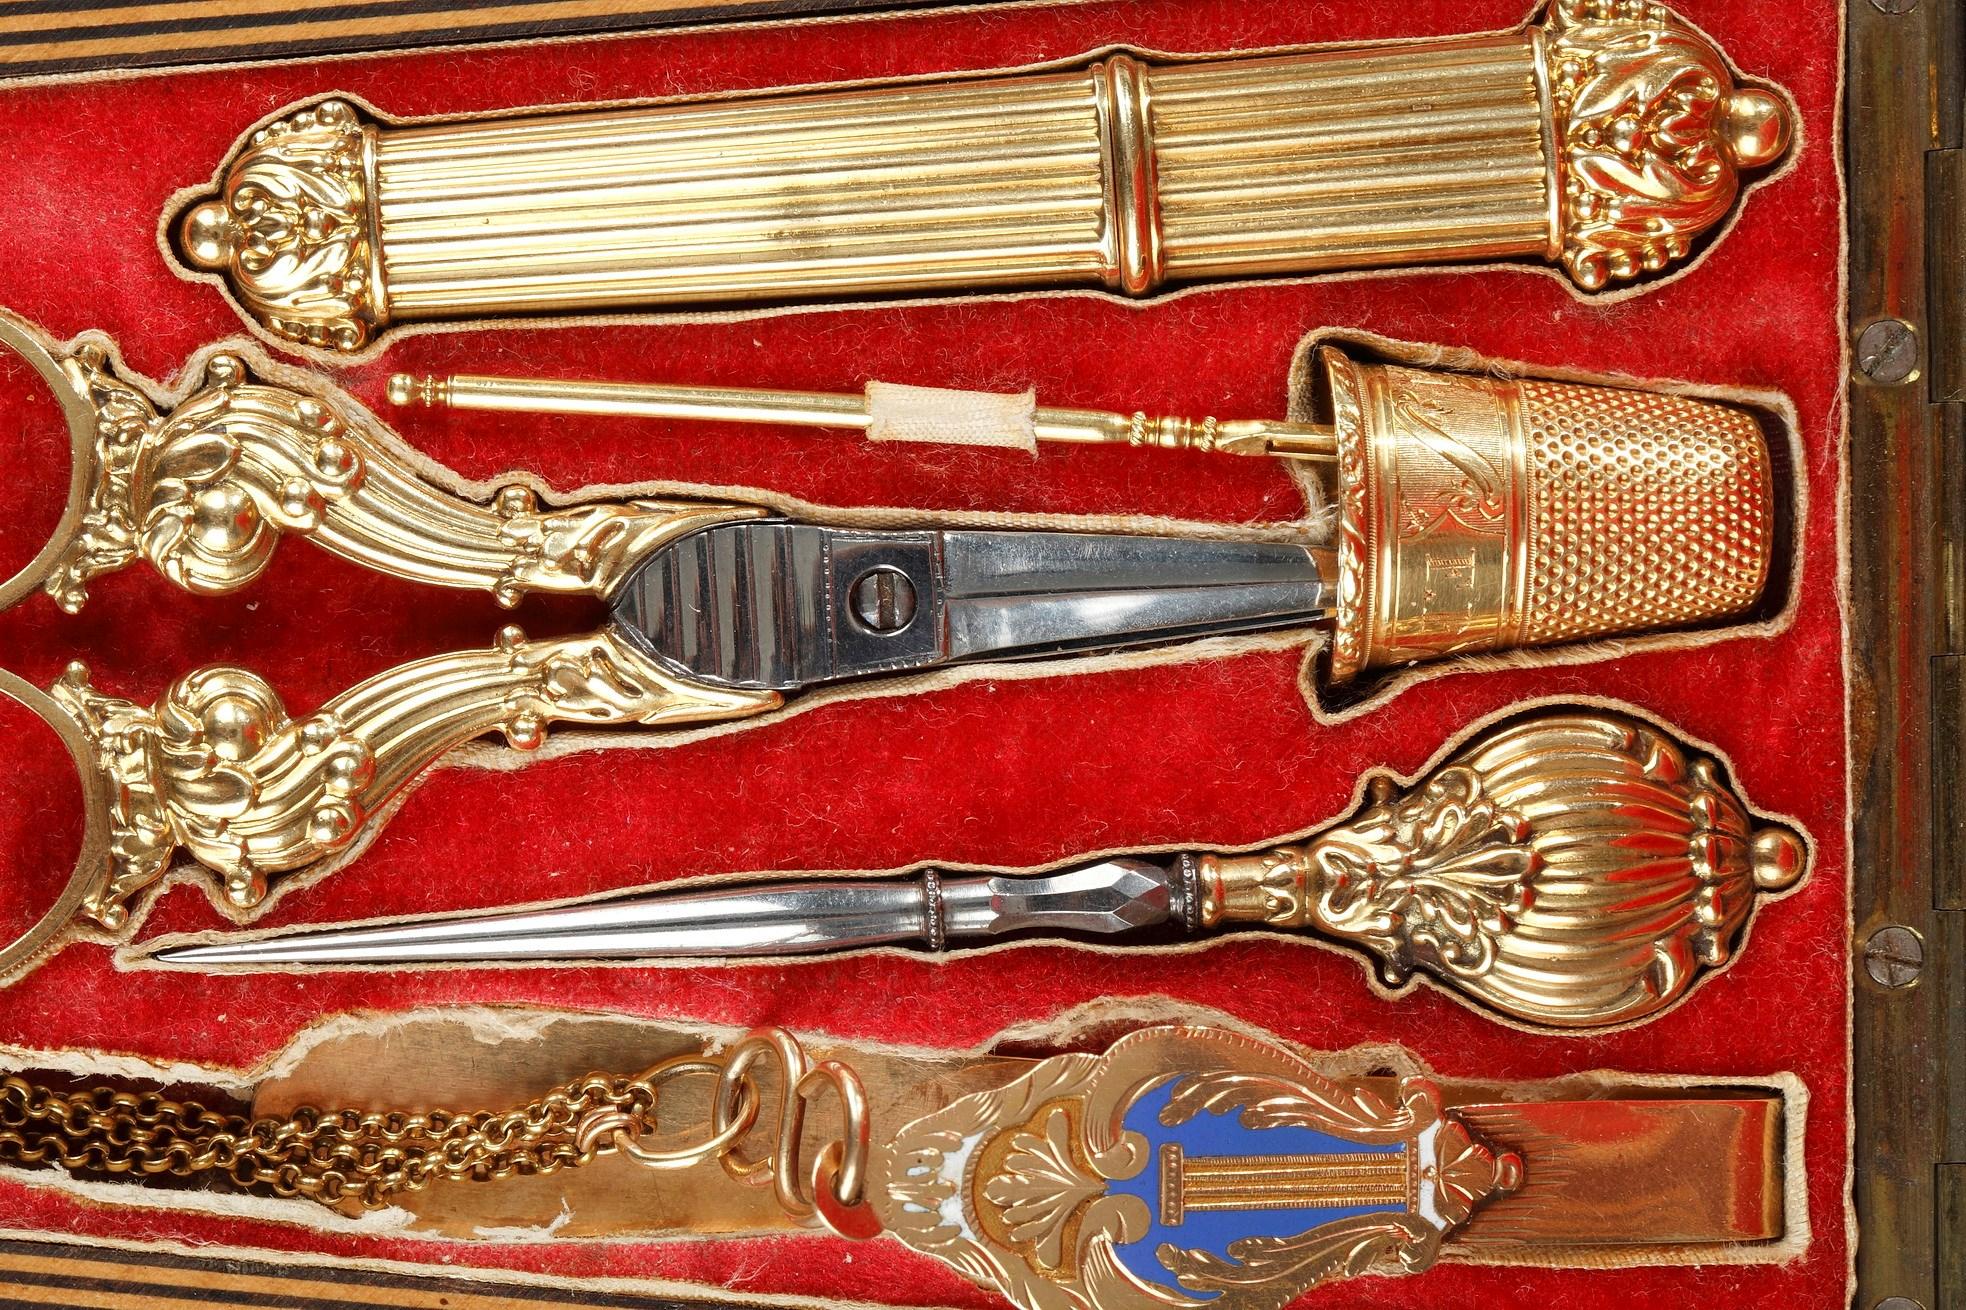 A Restauration set presented in a monogrammed trapezoidal case made of light wood. The vanity case includes a gold needle case decorated with flutes, a dice and a wool needle, a gold and steel punch and a pair of gold and steel scissors.

In the